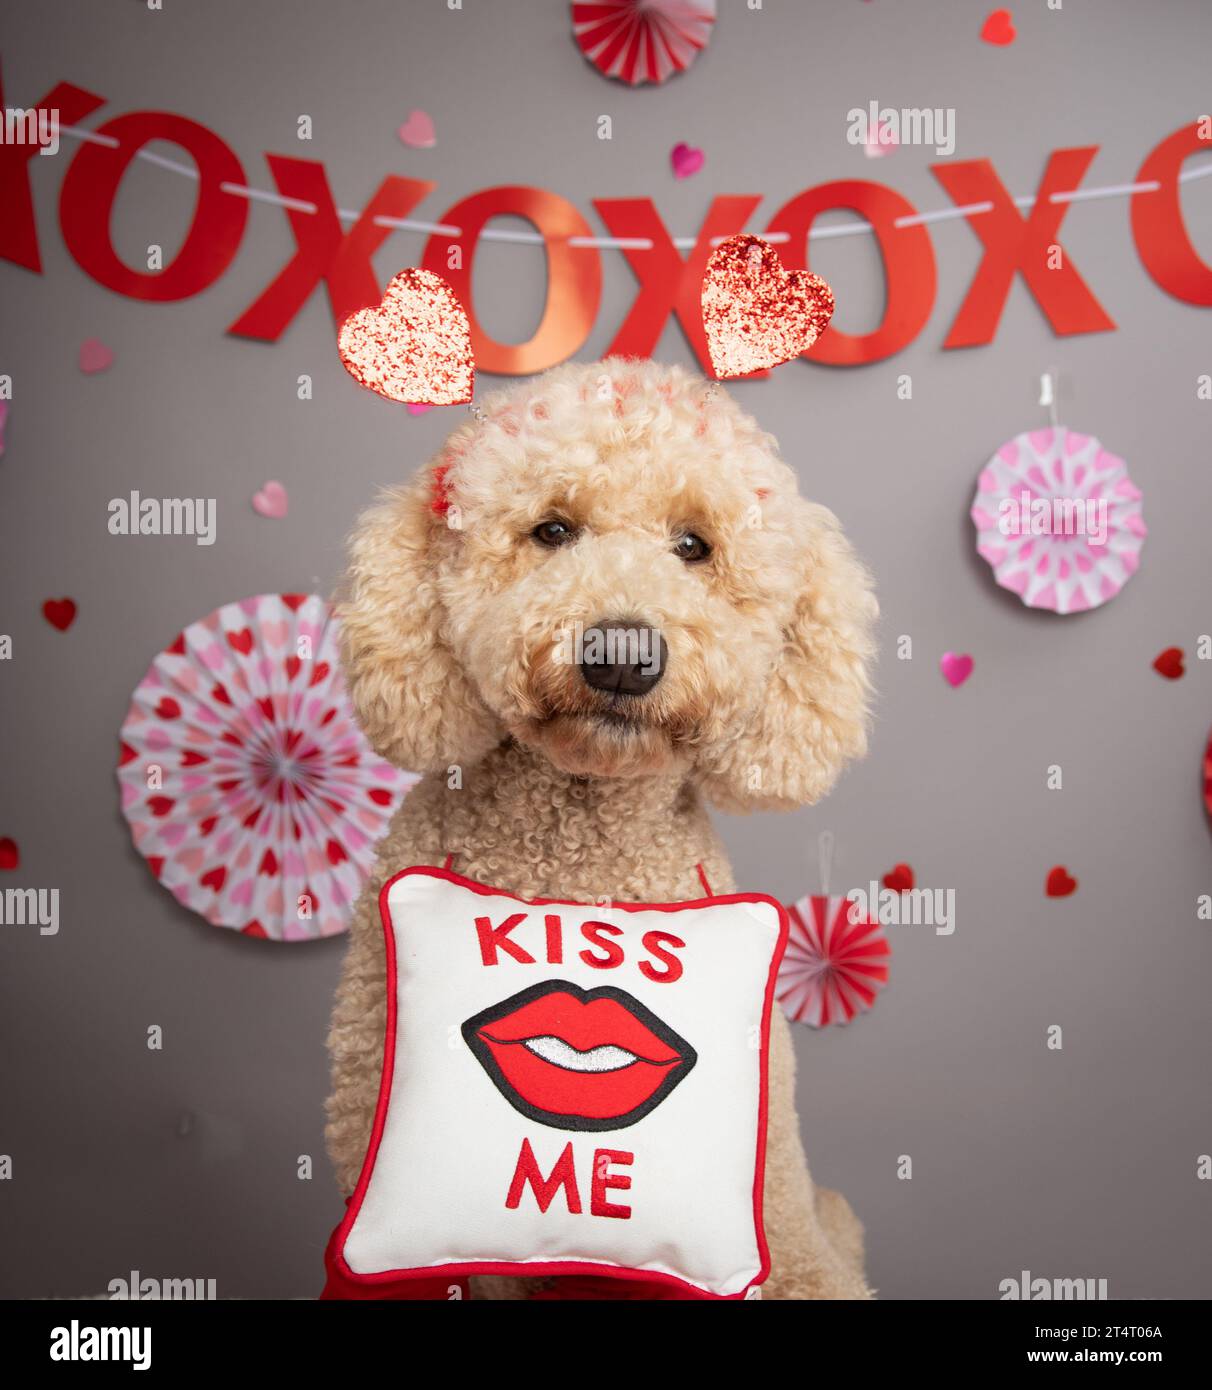 Portrait of a miniature goldendoodle wearing a kiss me sign around its neck sitting in front of festive party decorations Stock Photo